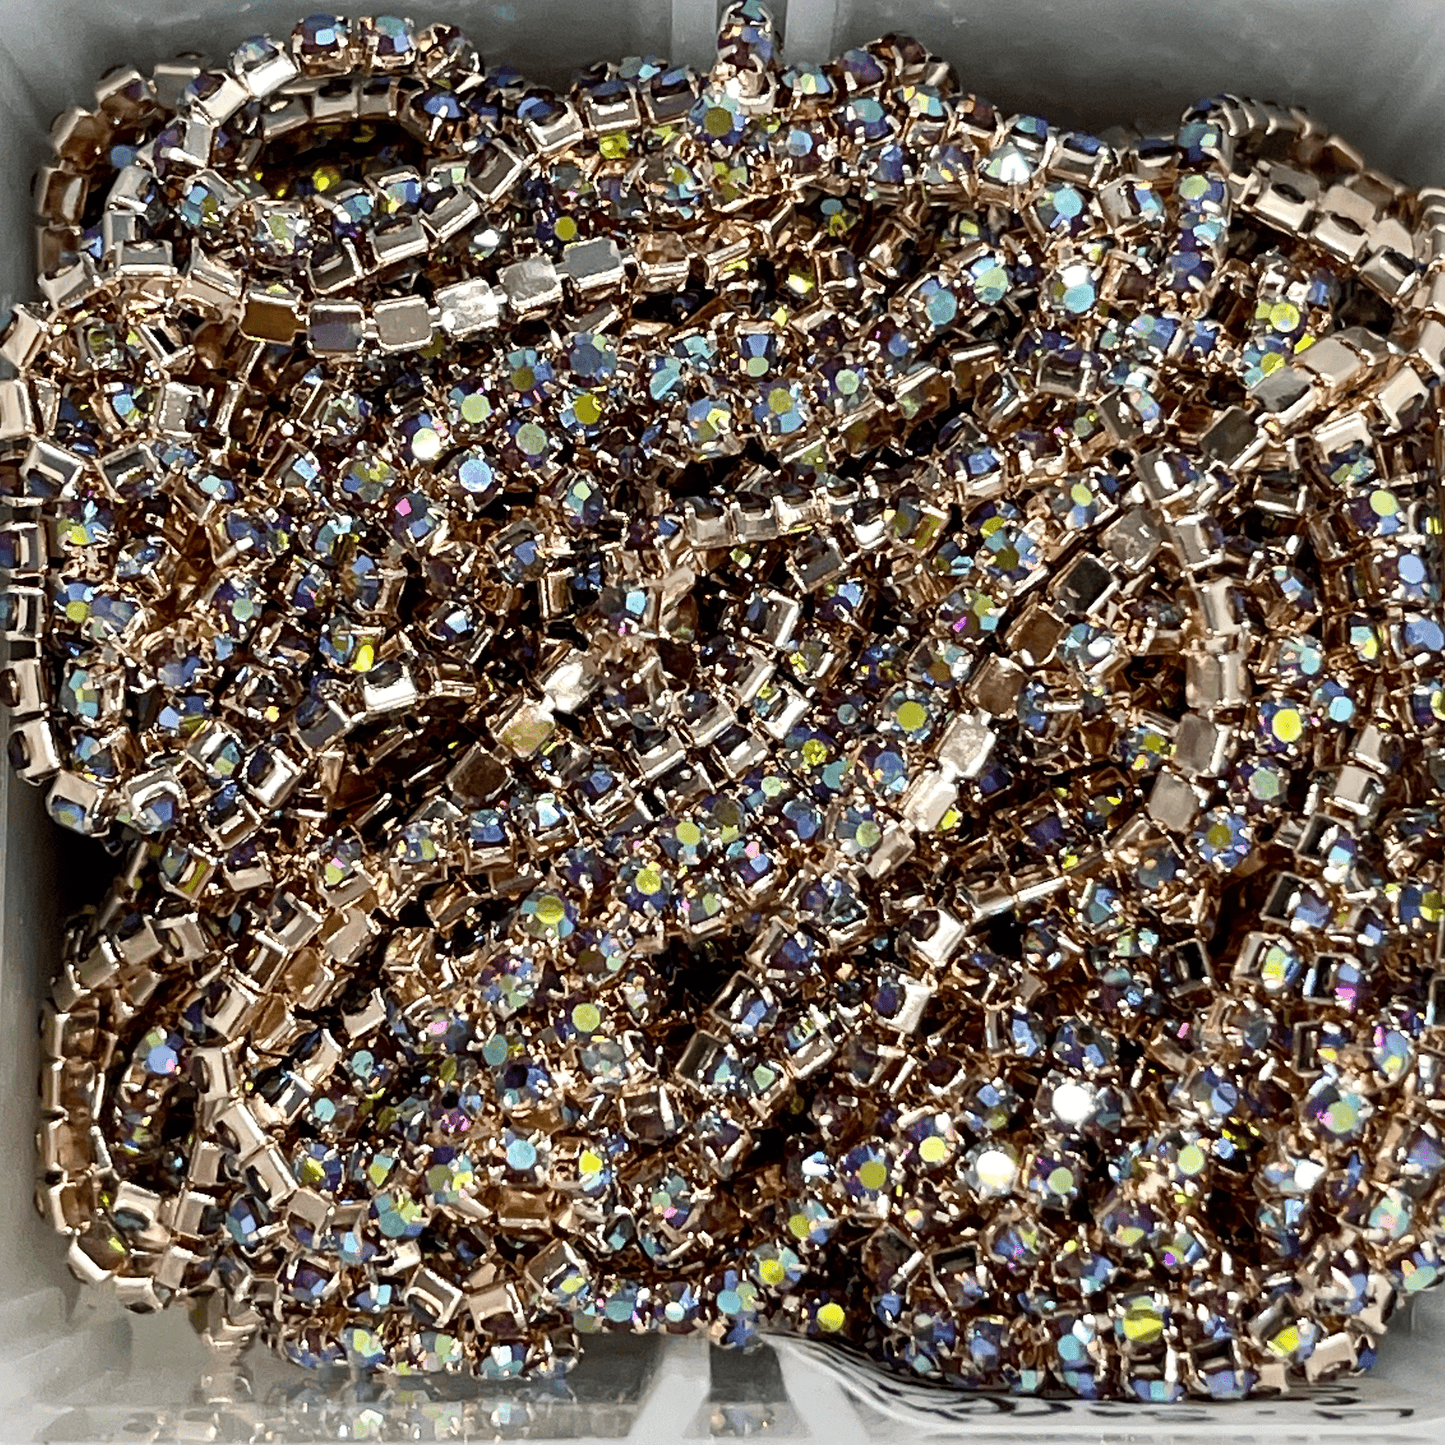 Sundaylace Creations & Bling SS6 Metal Rhinestone Chain Ss6 Light Sapphire (Periwrinkle) AB Rhinestone with Champagne Dense Chain, Rhinestone Metal Chain